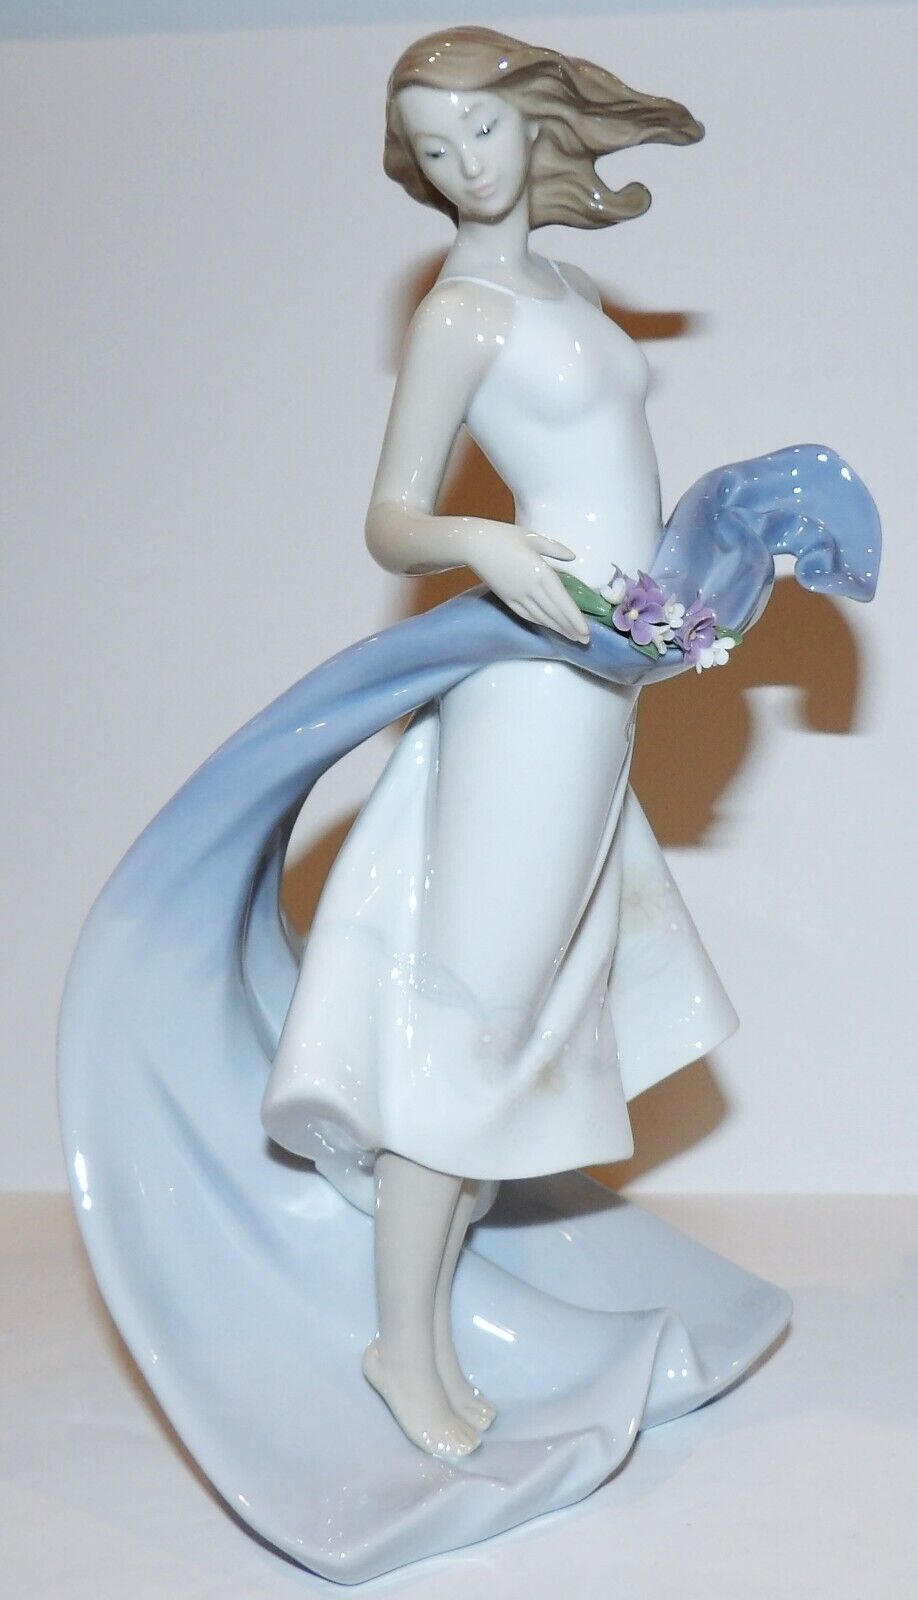 RARE RETIRED LLADRO PORCELAIN PRIVILEGE #8427 BLISSFUL YOUTH FIGURINE IN BOX